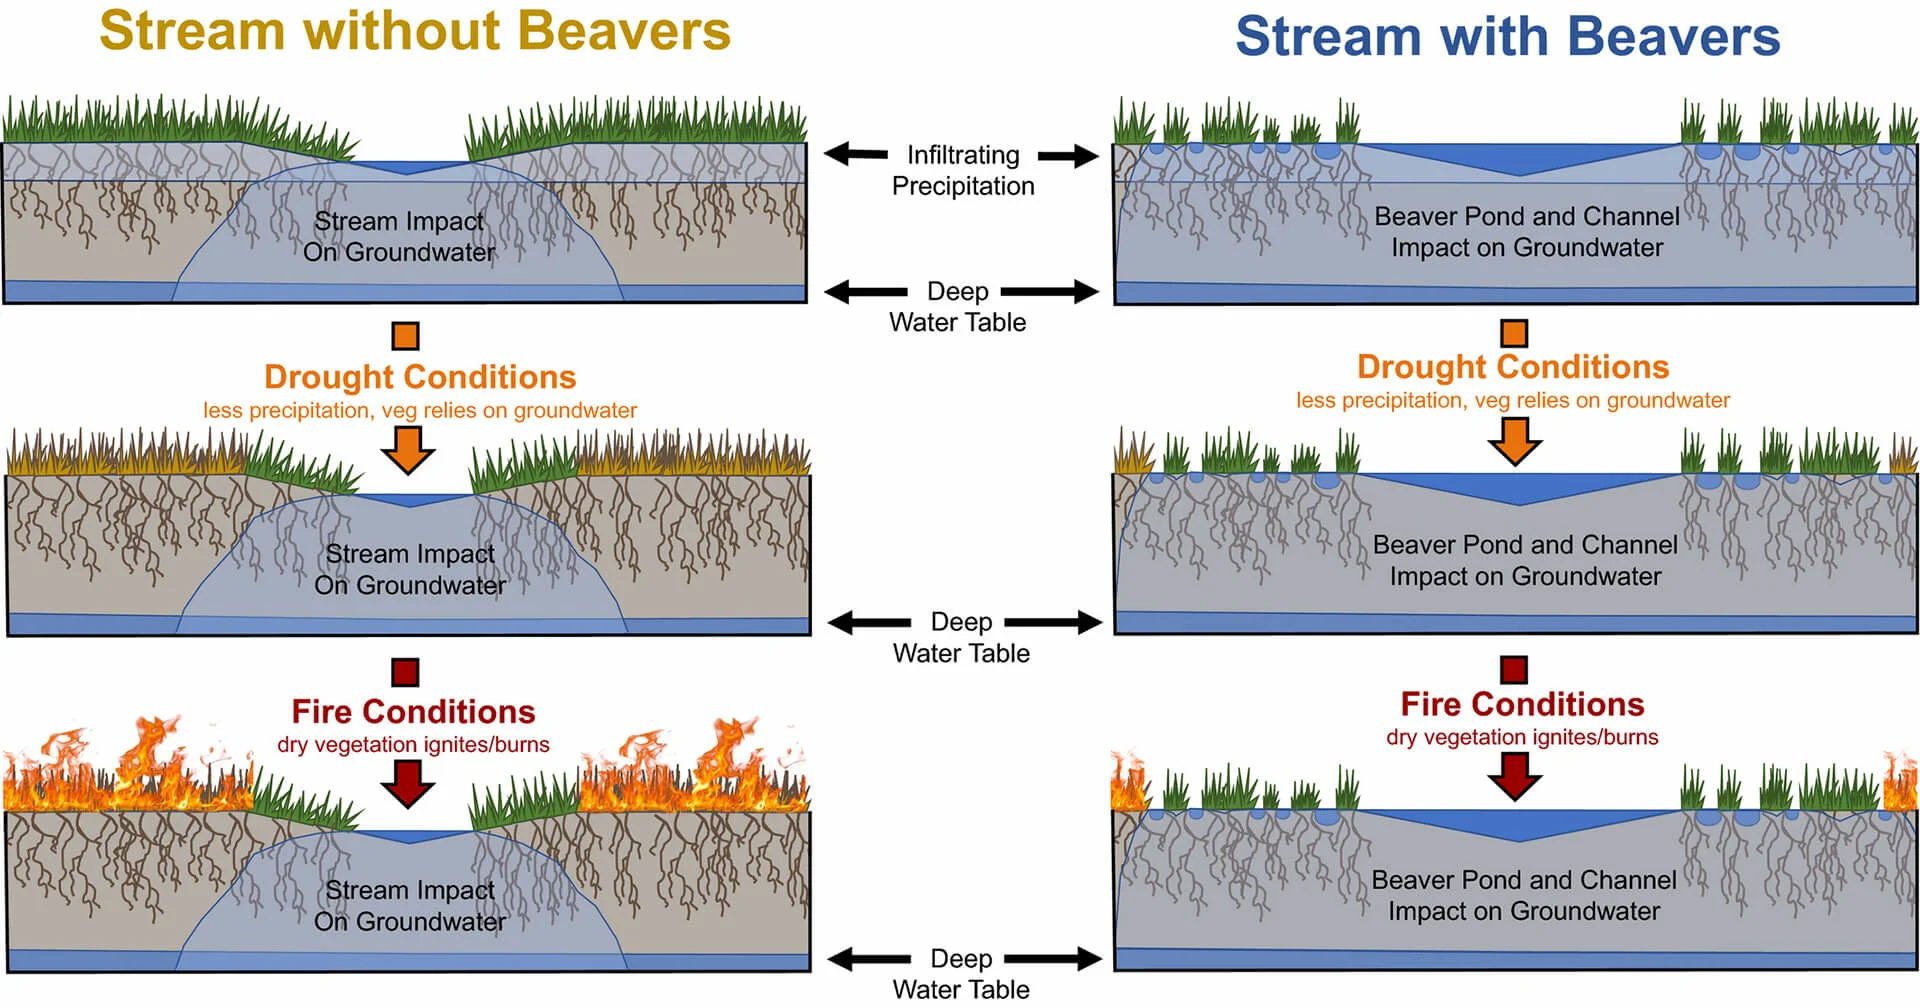 Conceptual model of vegetation response to normal conditions (top), drought (middle), and fire (bottom) in creeks with (right) and without (left) beavers. (esajournals.onlinelibrary.wiley.com)